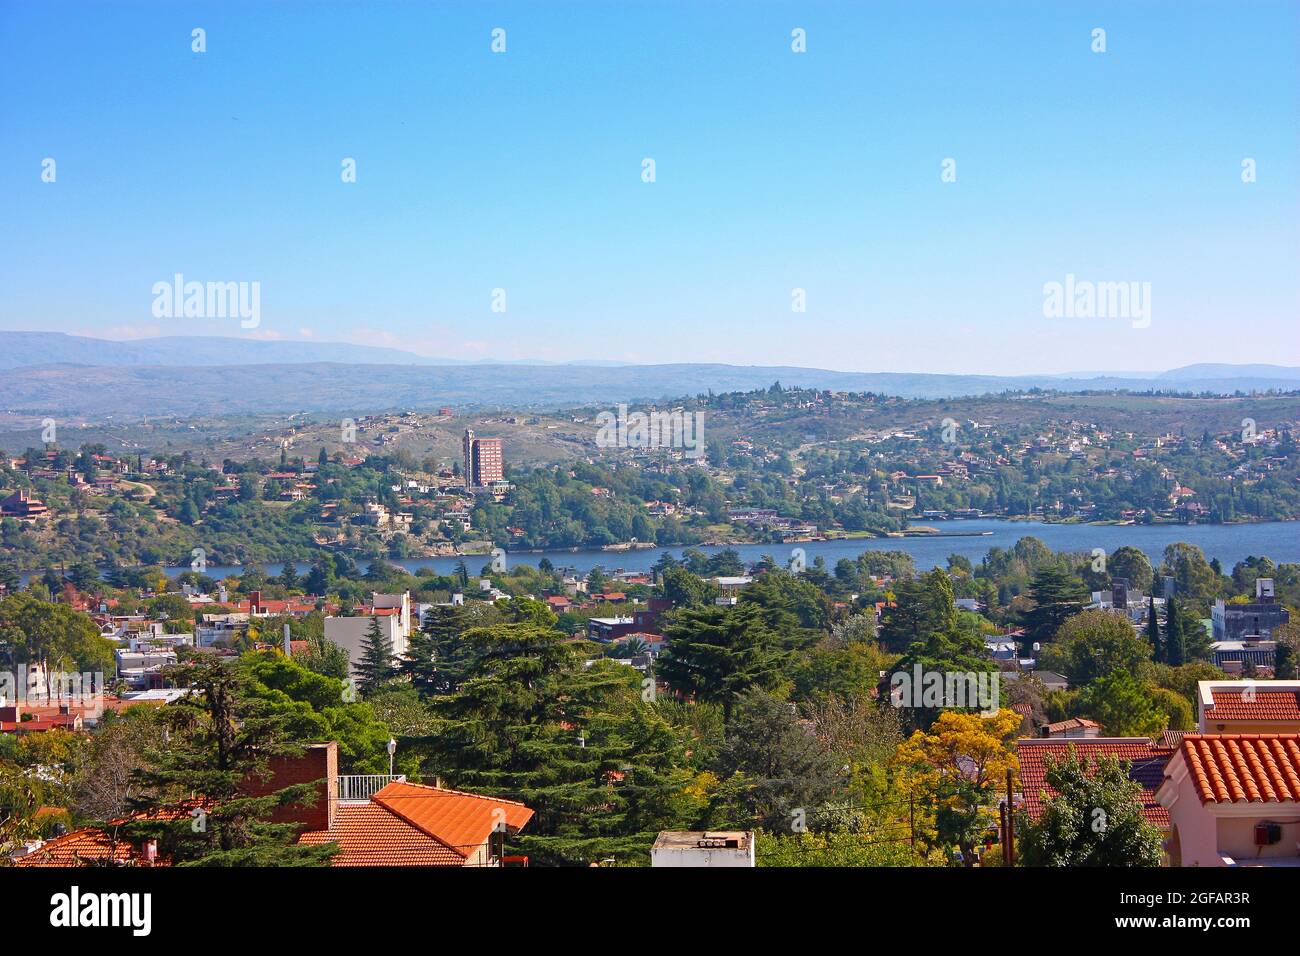 VILLA CARLOS PAZ, CORDOBA, ARGENTINA.Panoramic view from the top of a hill of the landscape of Carlos Paz Town in a sunny day. Stock Photo